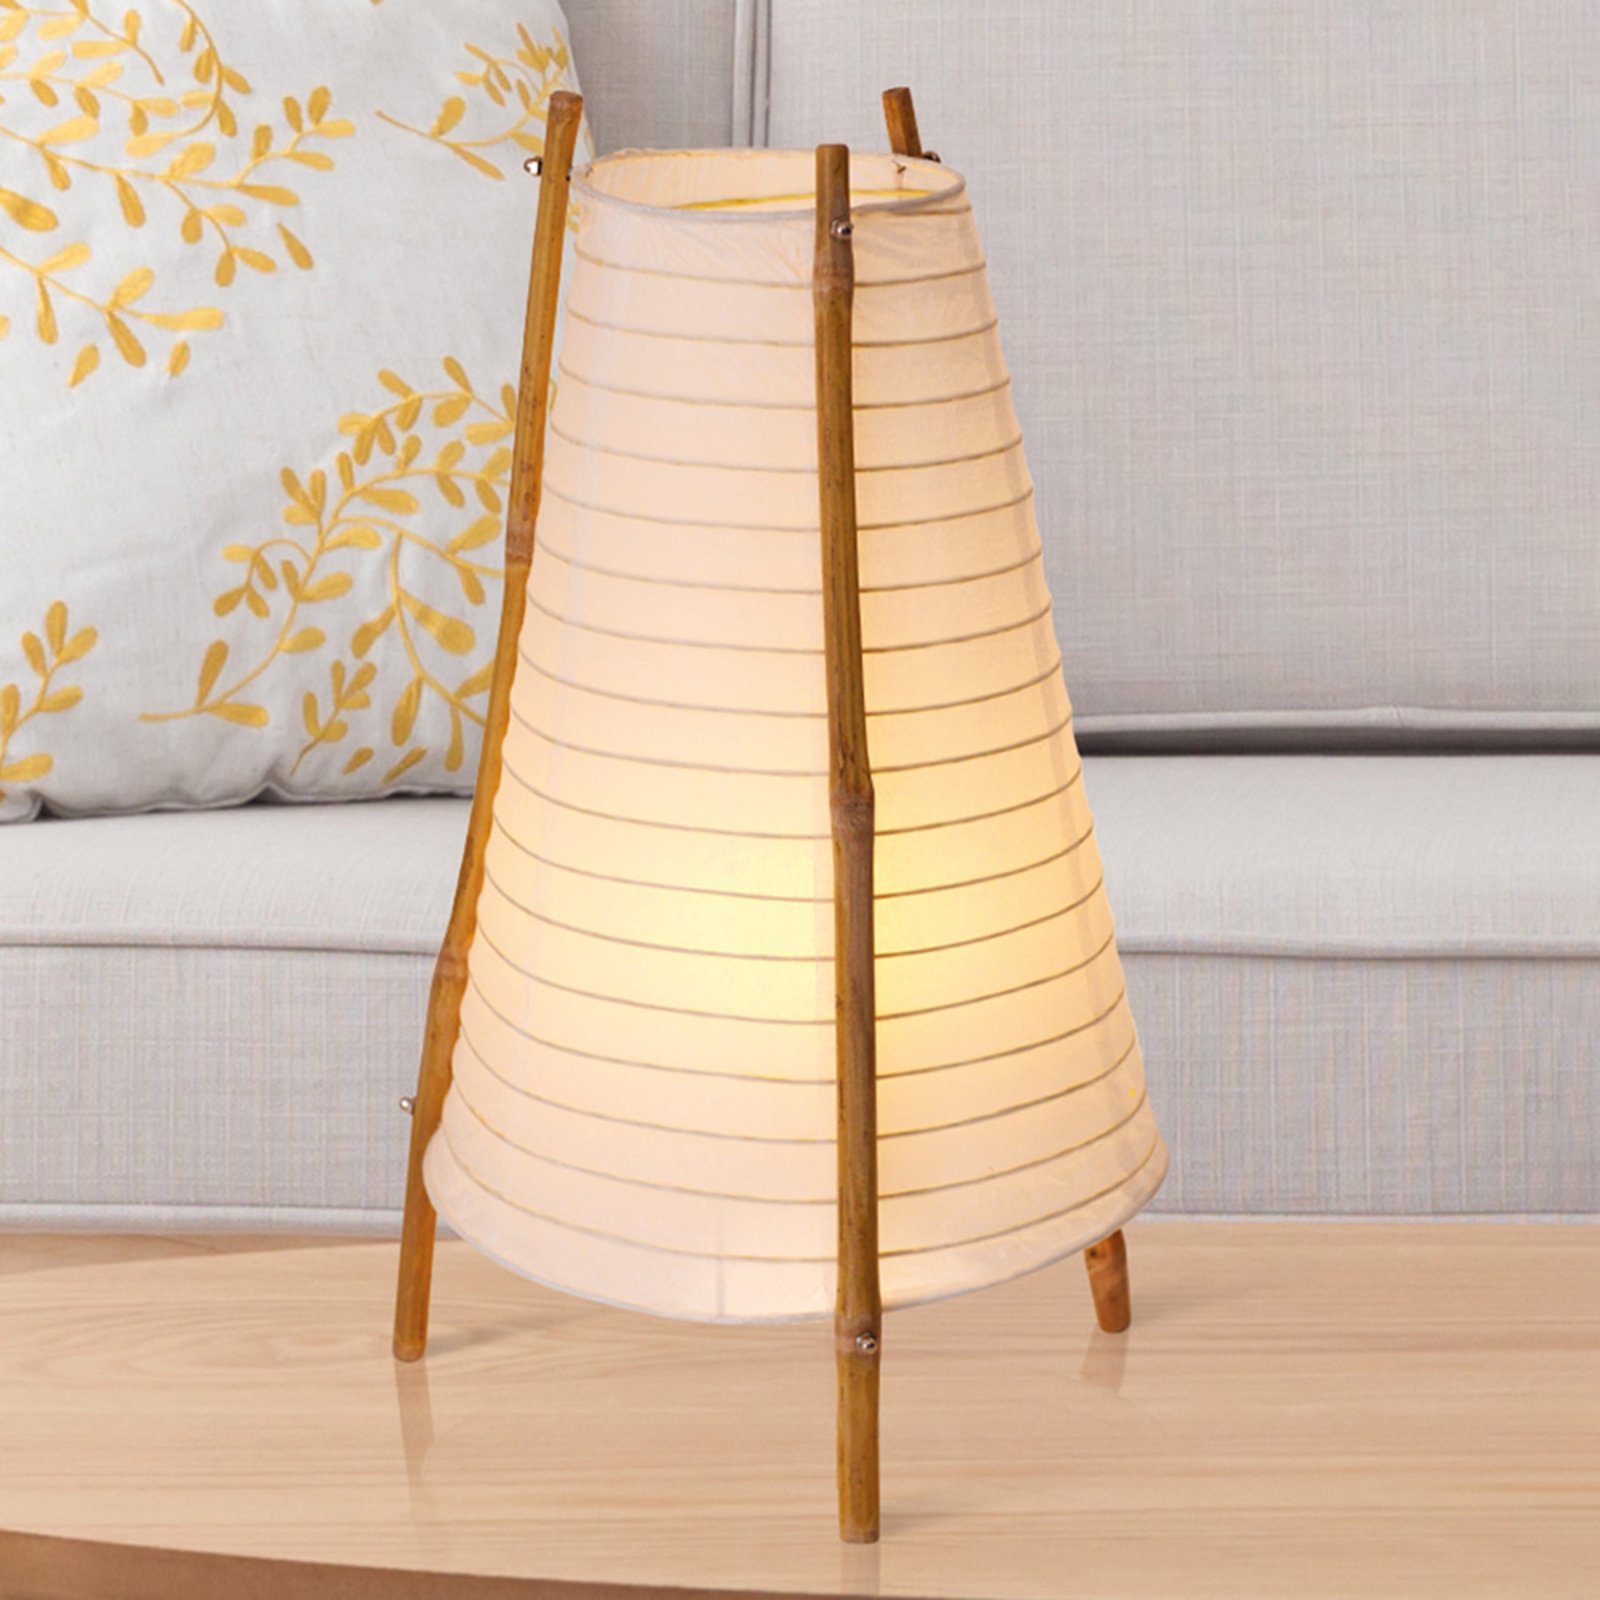 Bamboo table lamp made of bamboo and paper